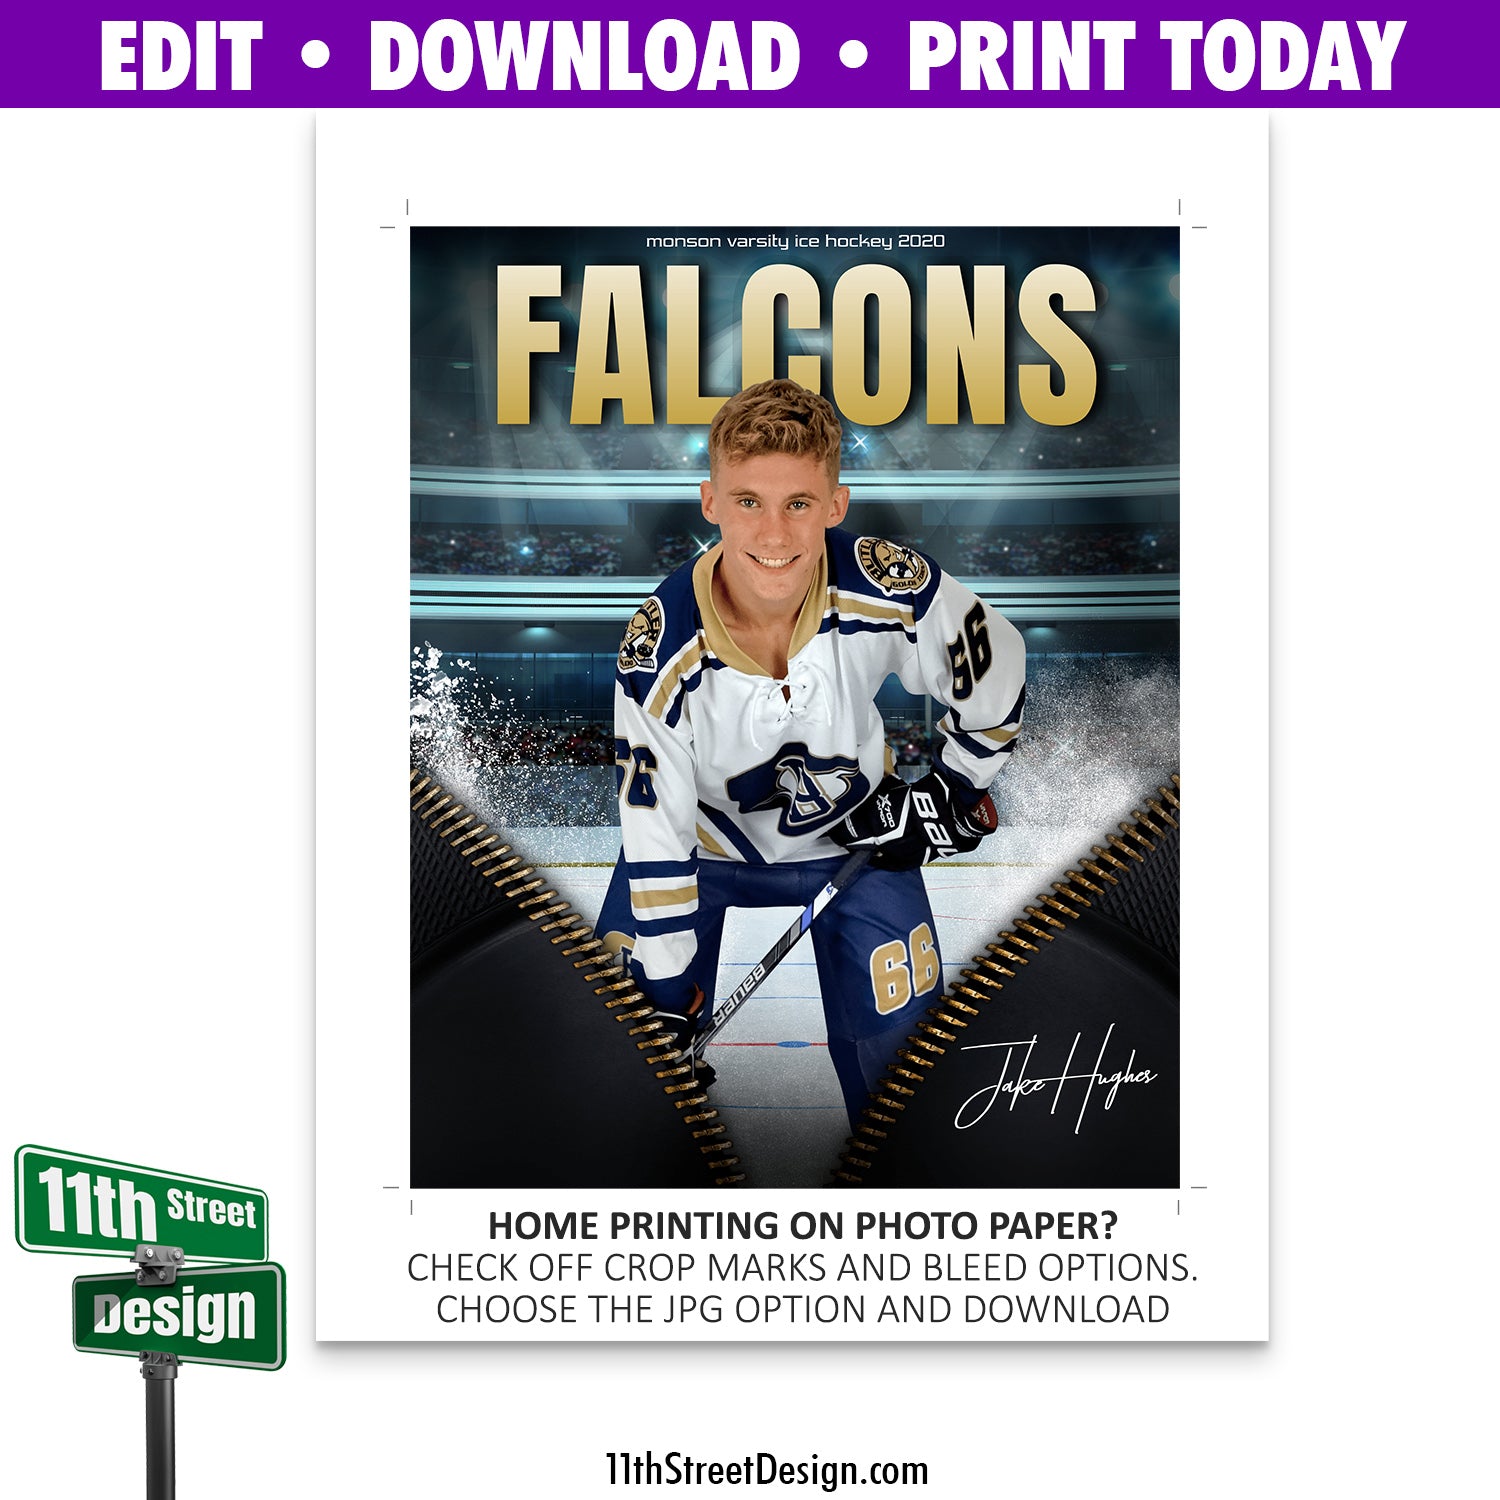 Falcons designs, themes, templates and downloadable graphic